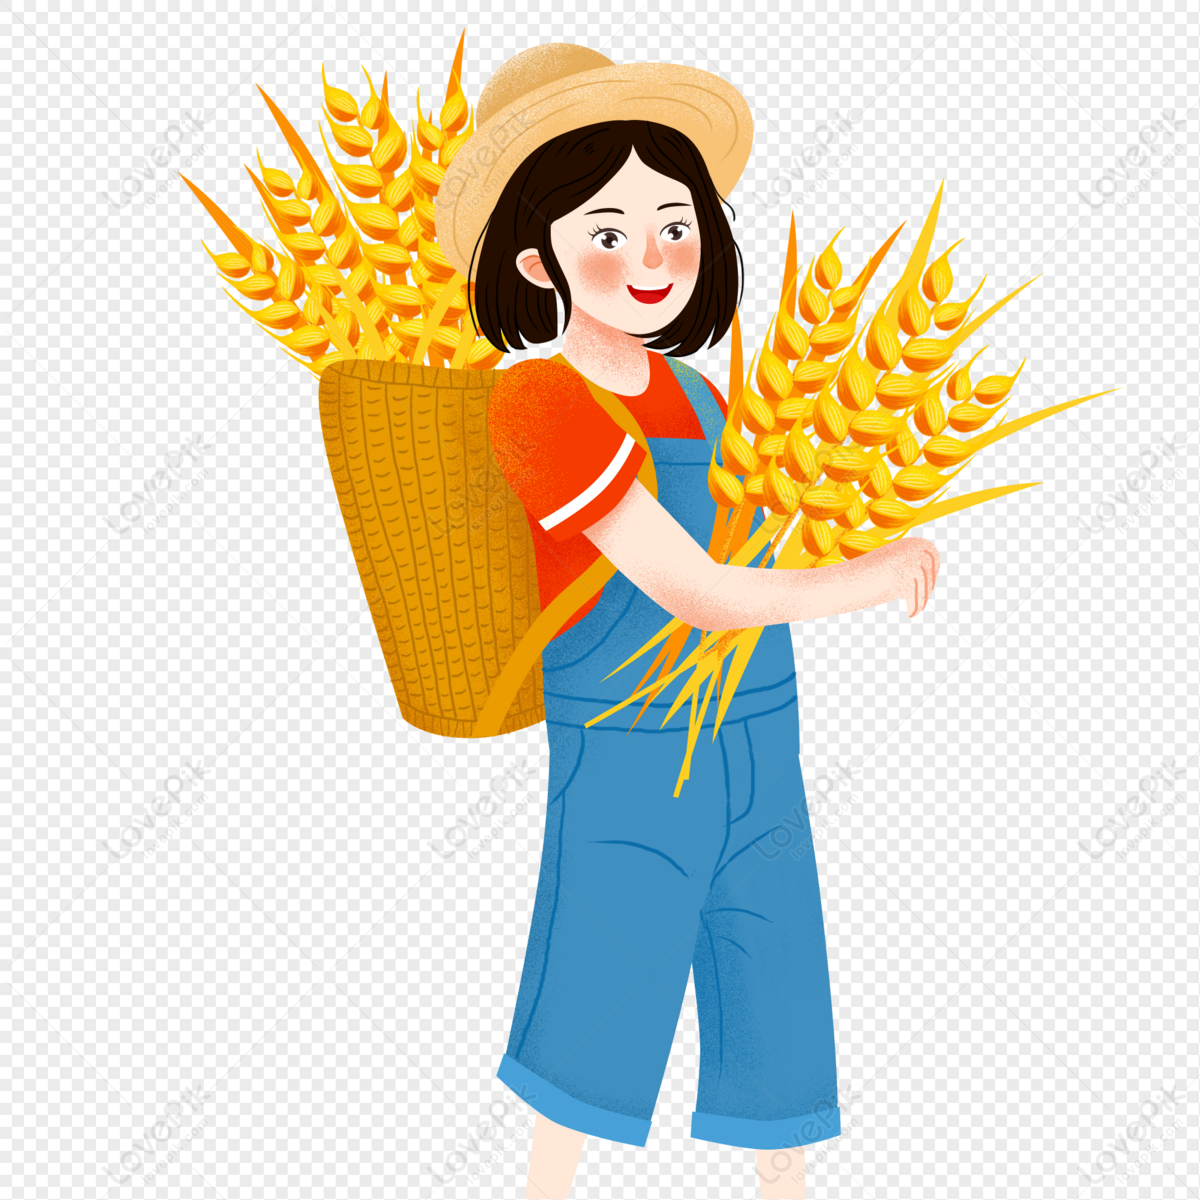 Cartoon Farmer PNG Image Free Download And Clipart Image For Free Download  - Lovepik | 401410171